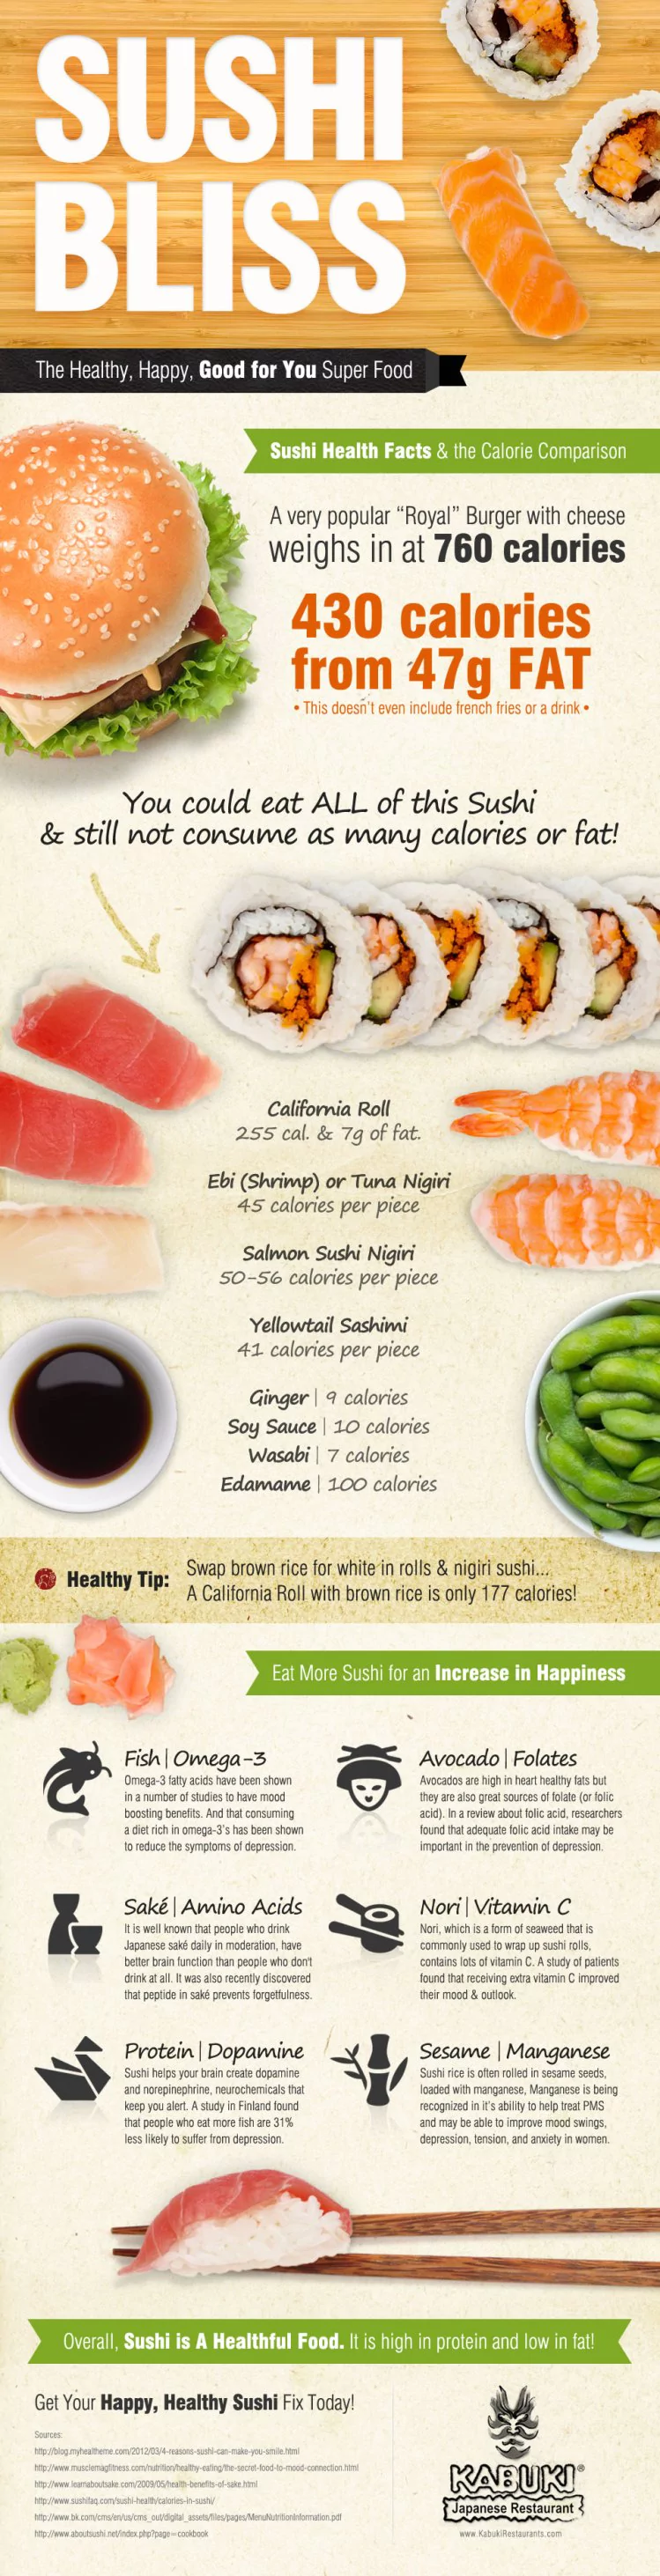 The Surprising Health Benefits of Sushi